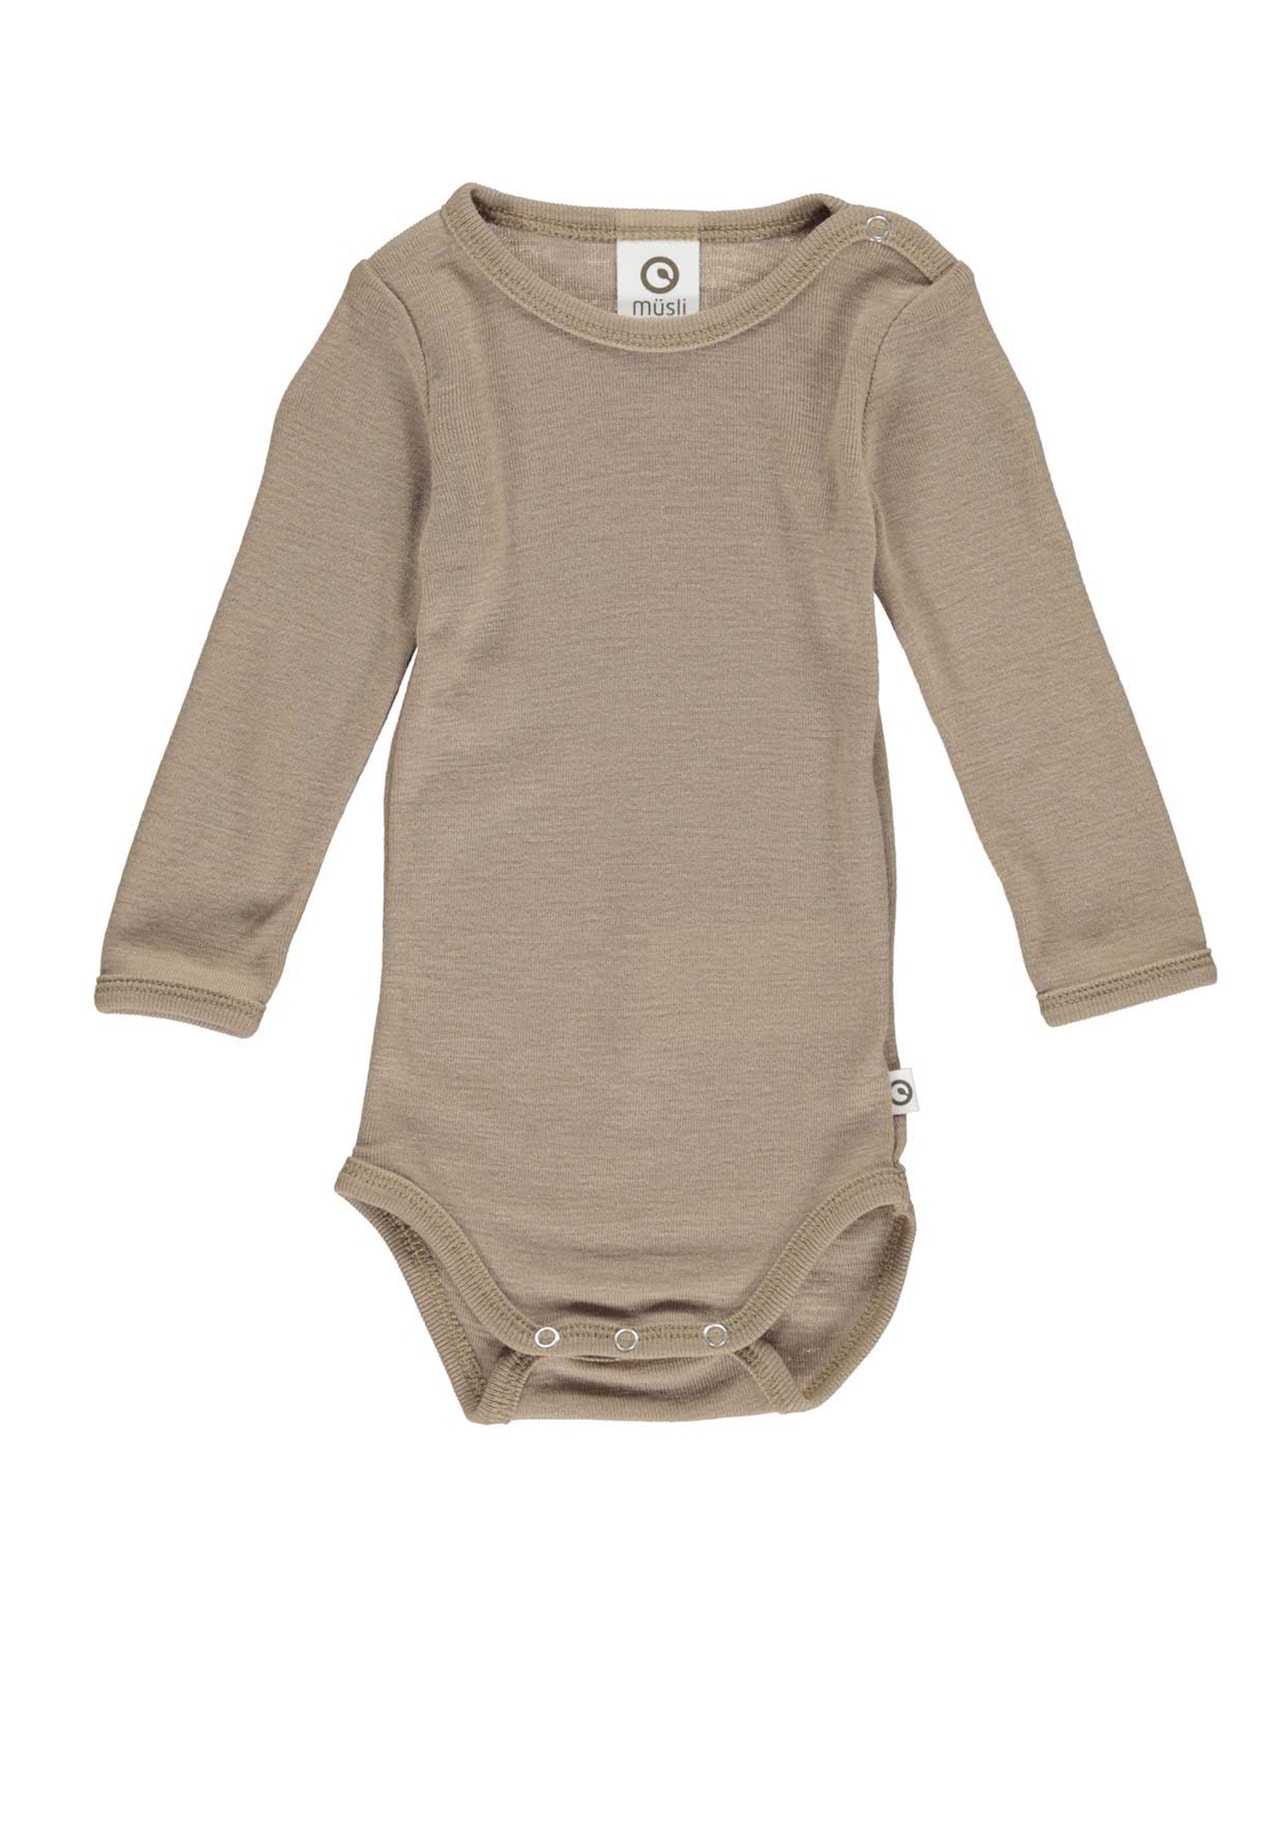 MAMA.LICIOUS Wol baby-romper -Seed - 1582041800